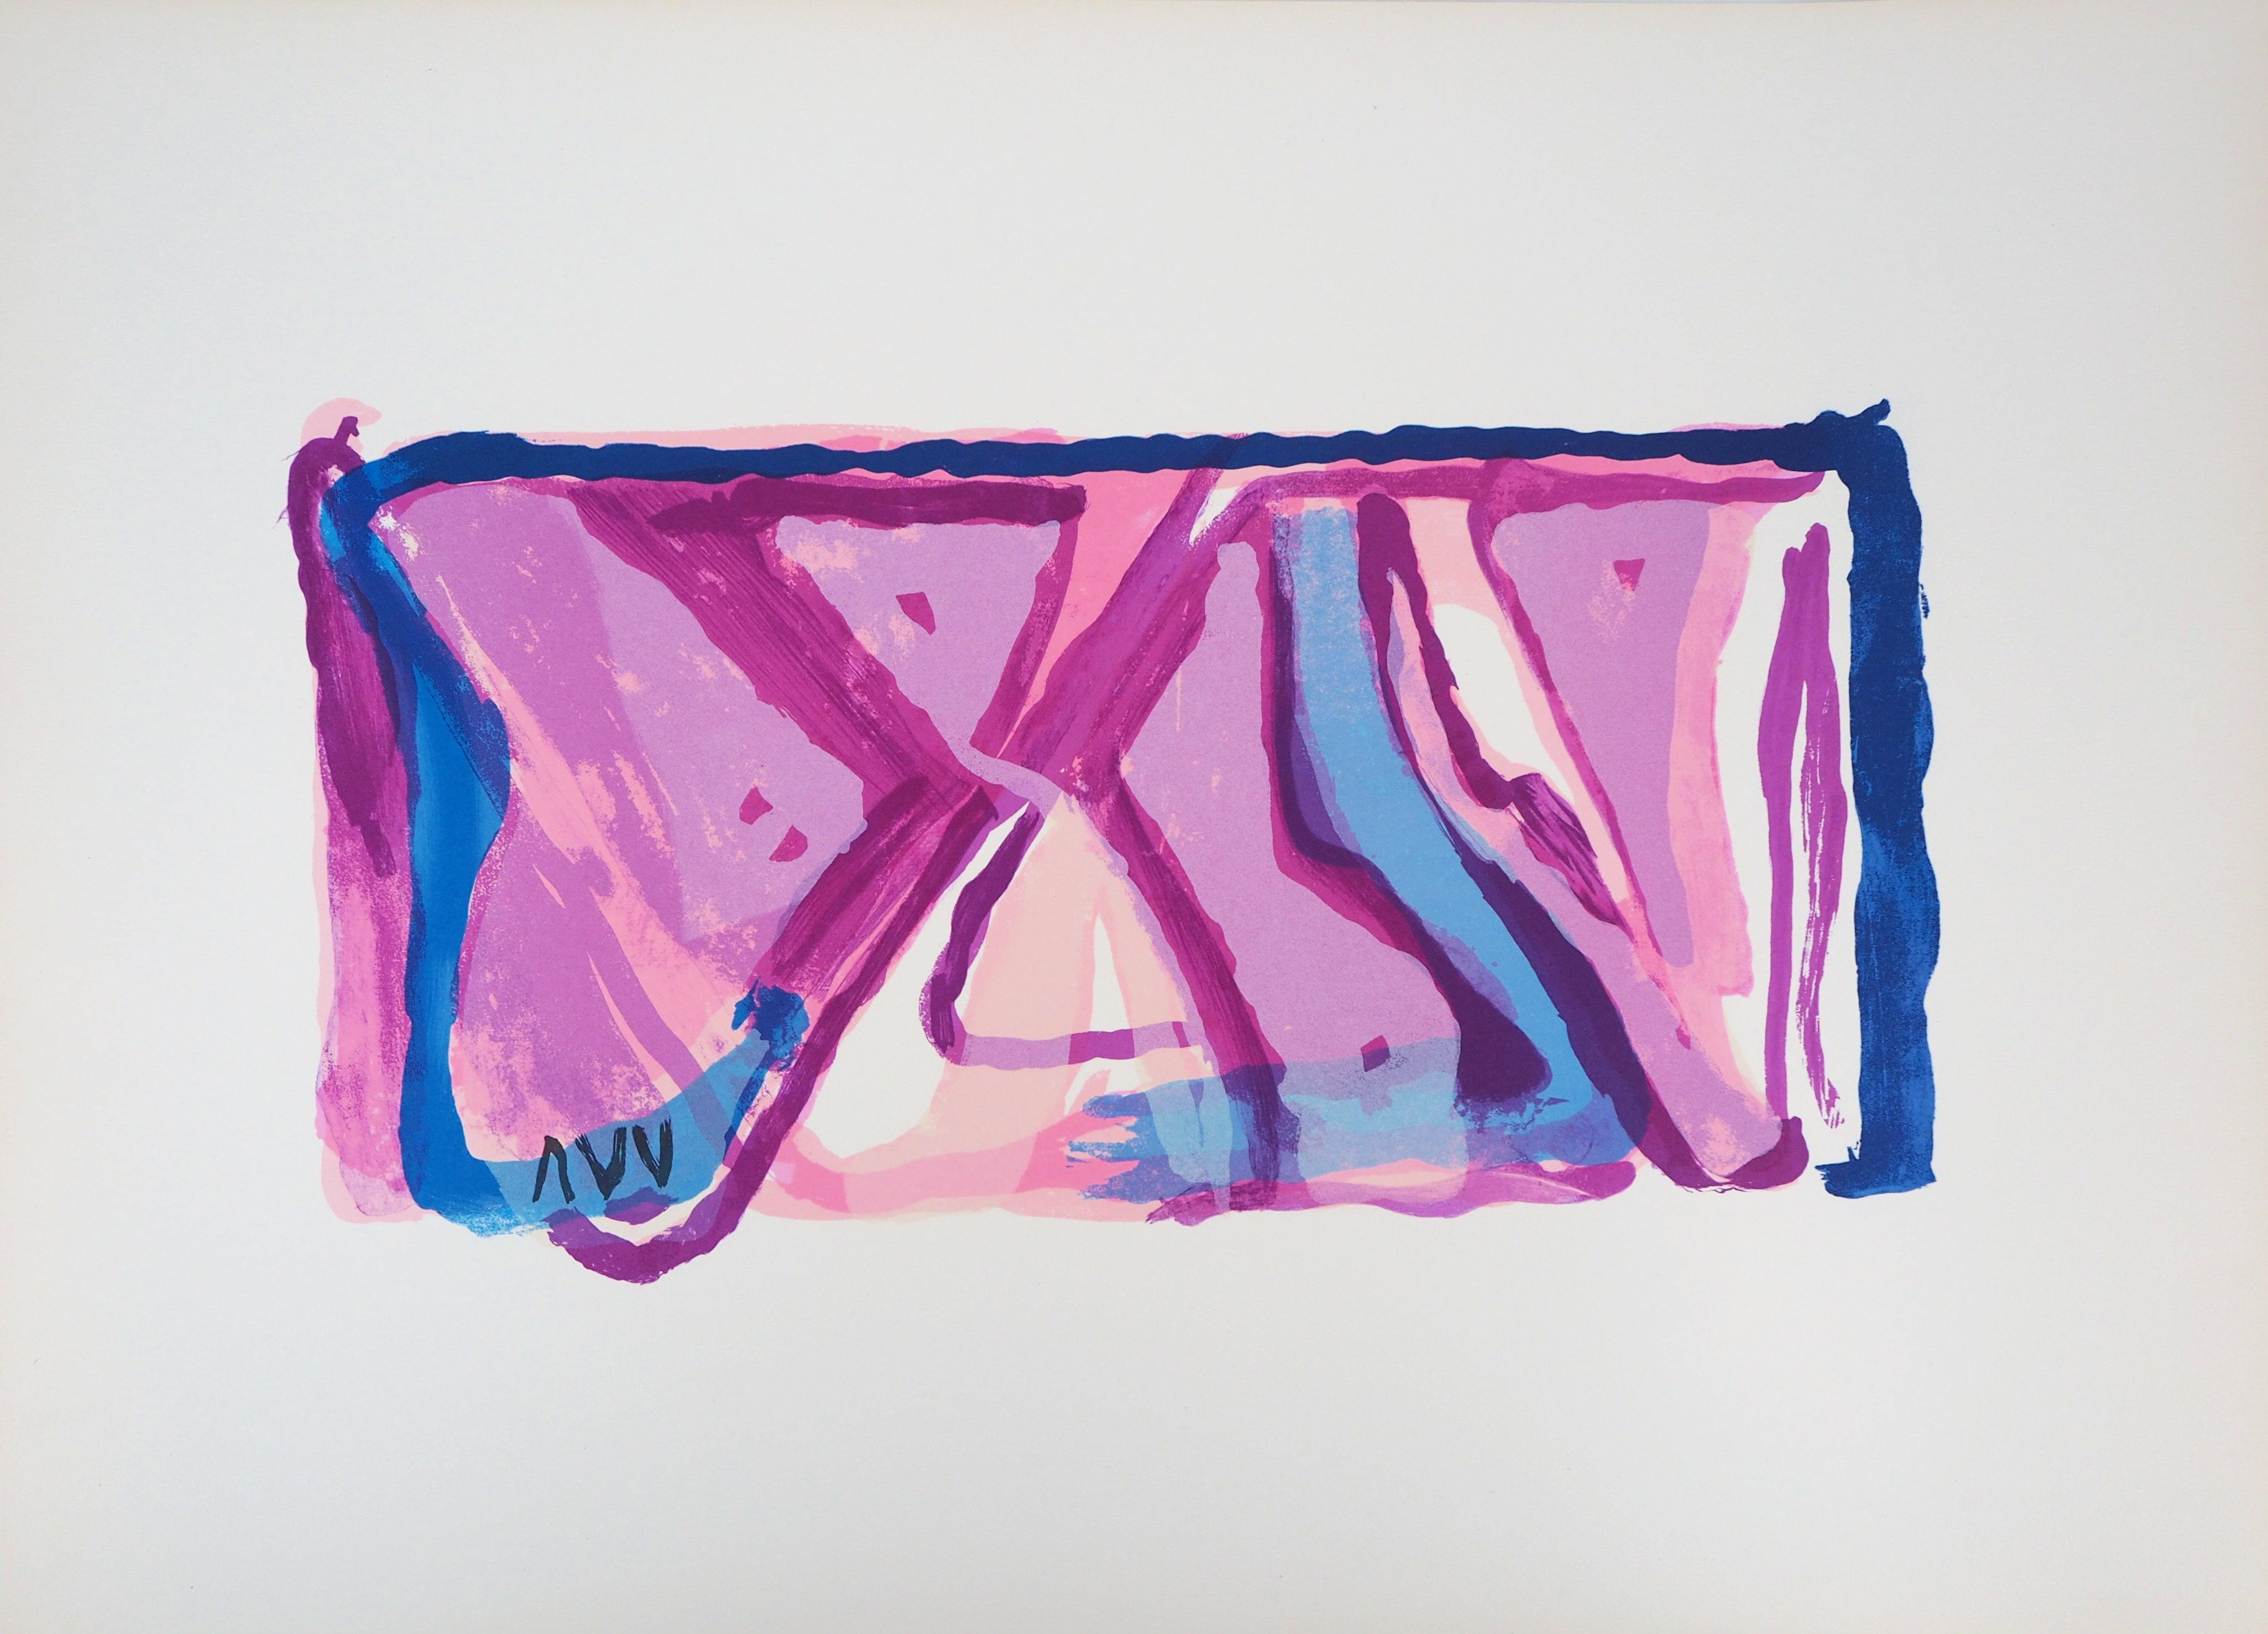 The Joy (Abstract Composition in Blue and Pink) - Original lithograph - Print by Bram Van Velde